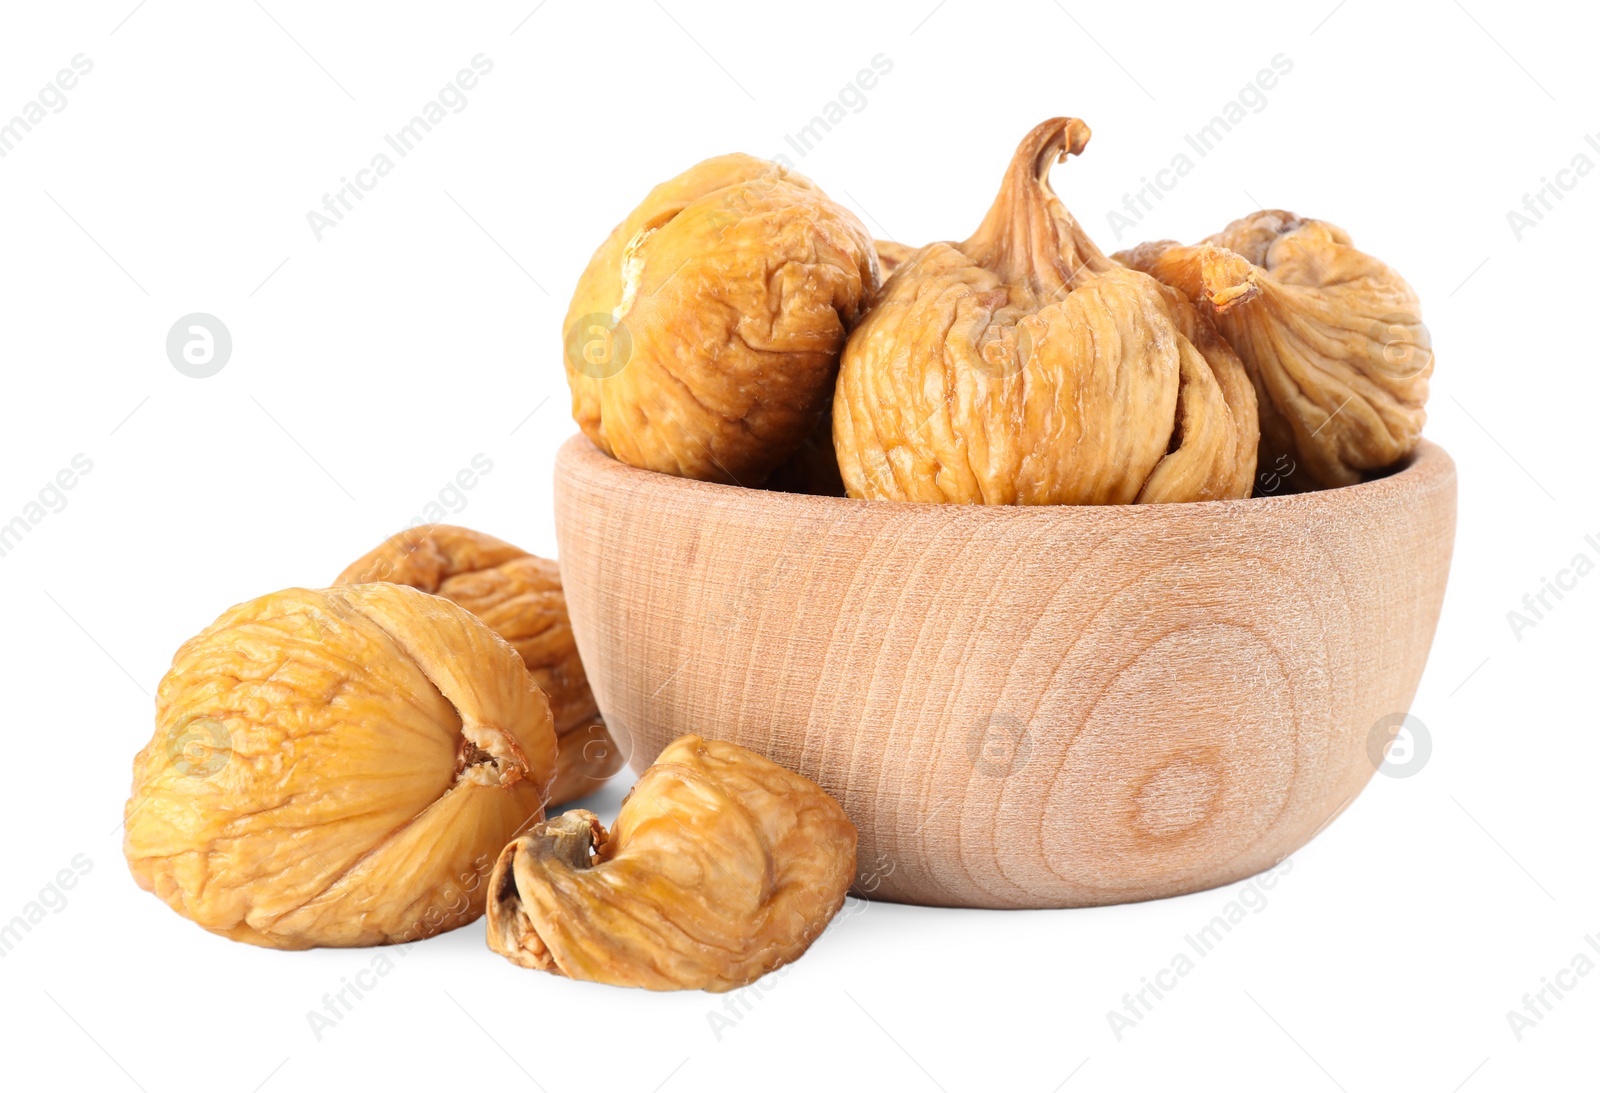 Photo of Wooden bowl and dried figs on white background